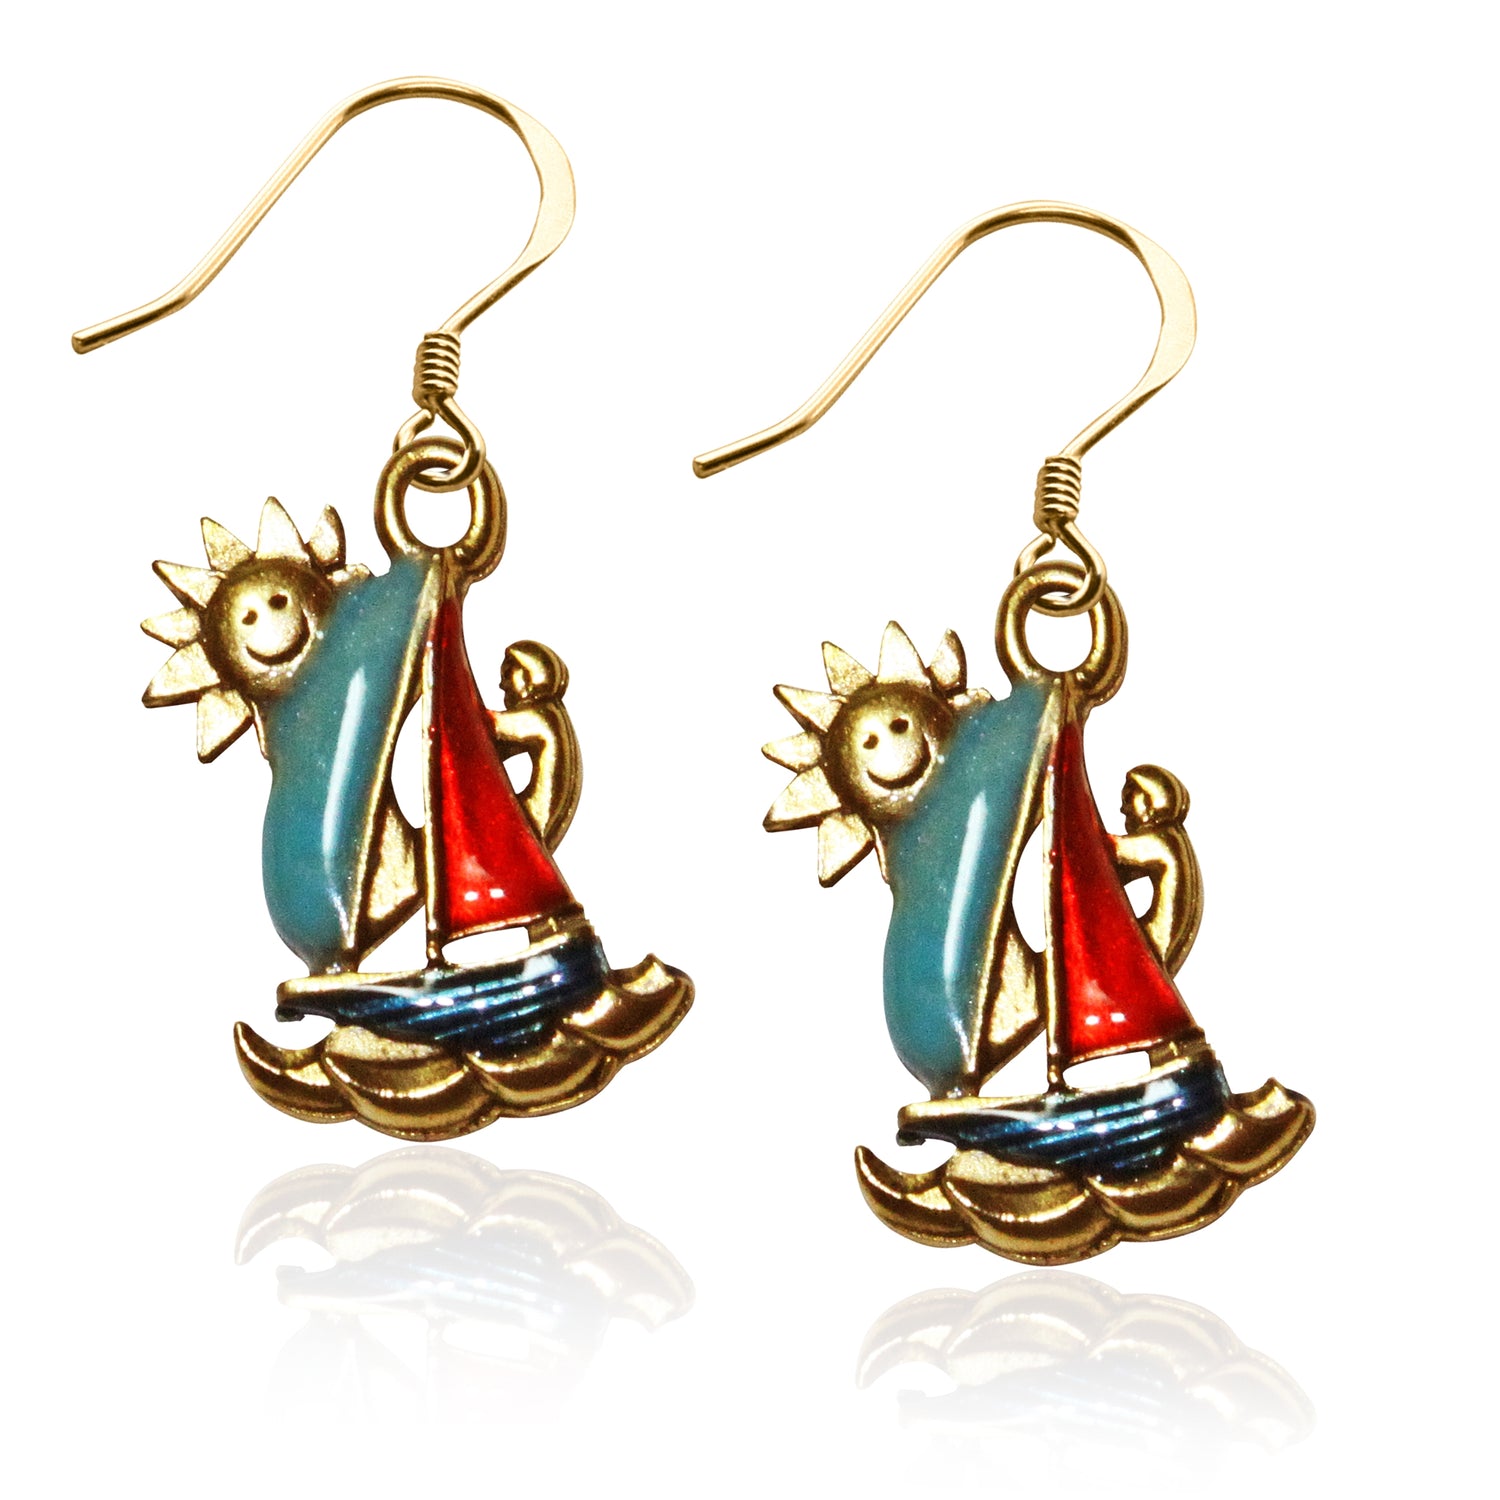 Whimsical Gifts | Sailboat Charm Earrings in Gold Finish | Holiday & Seasonal Themed | Spring & Summer Fun | Jewelry